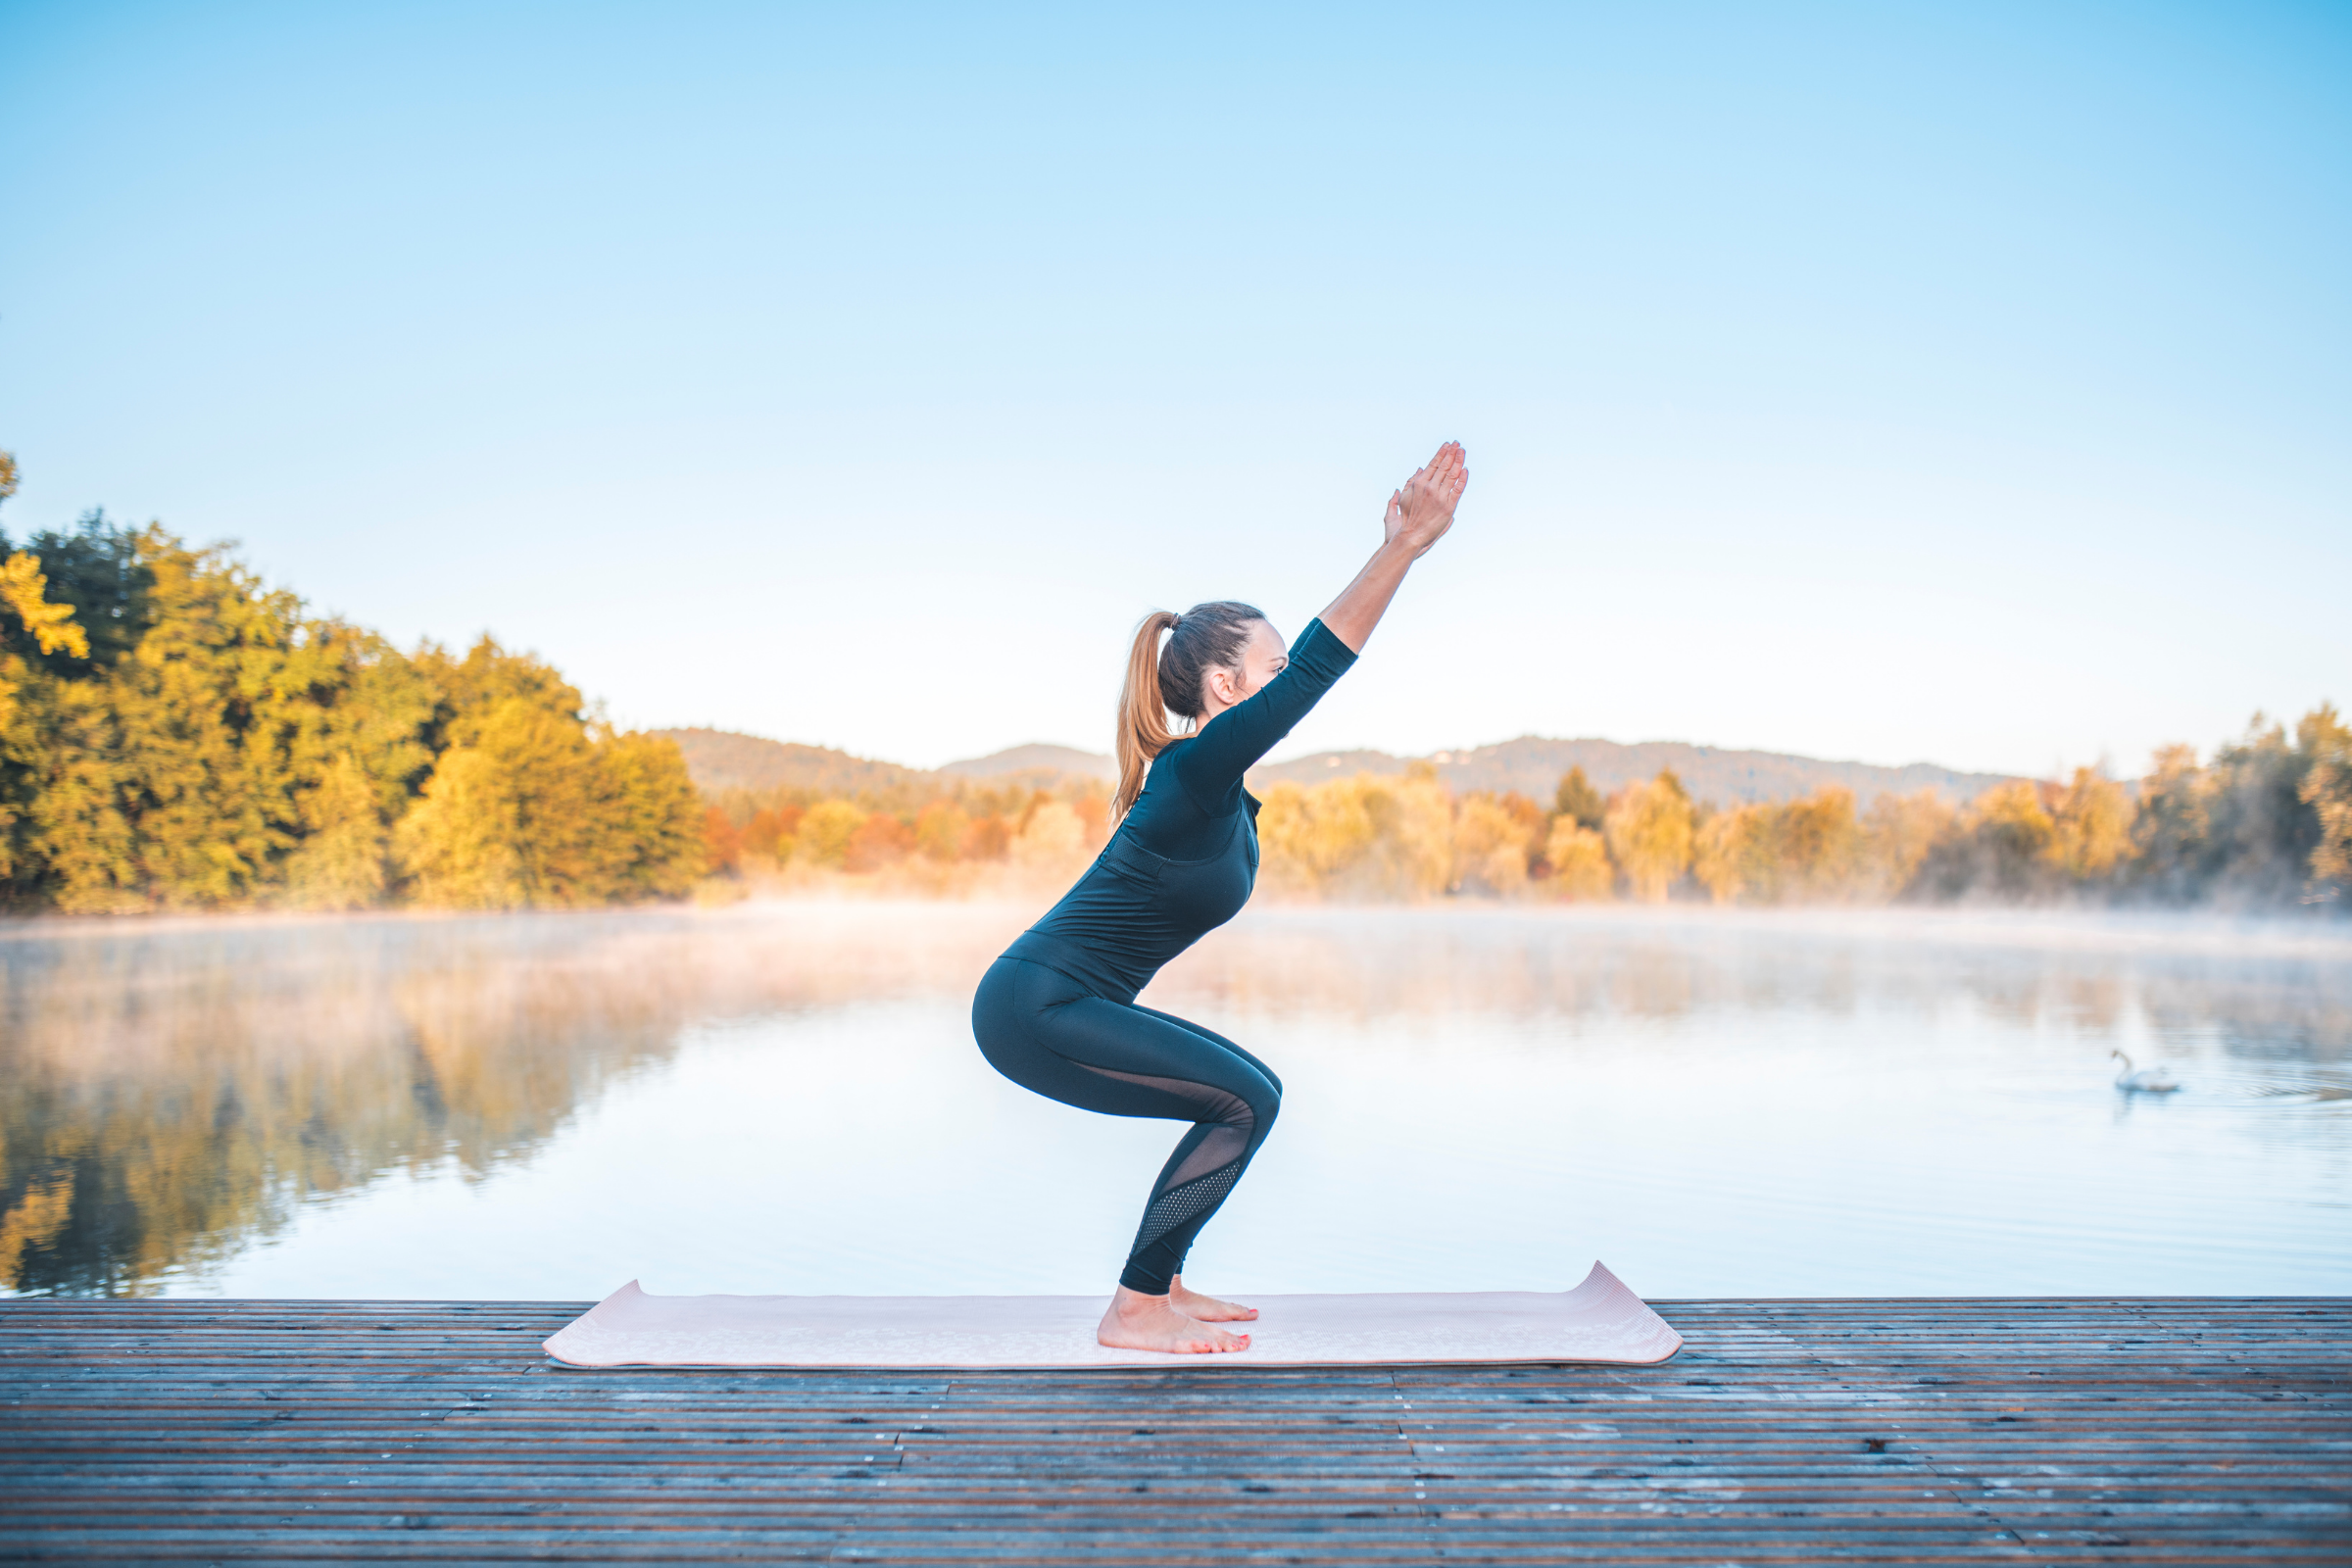 blonde woman with ponytail in all black on a wooden dock by water doing chair yoga pose